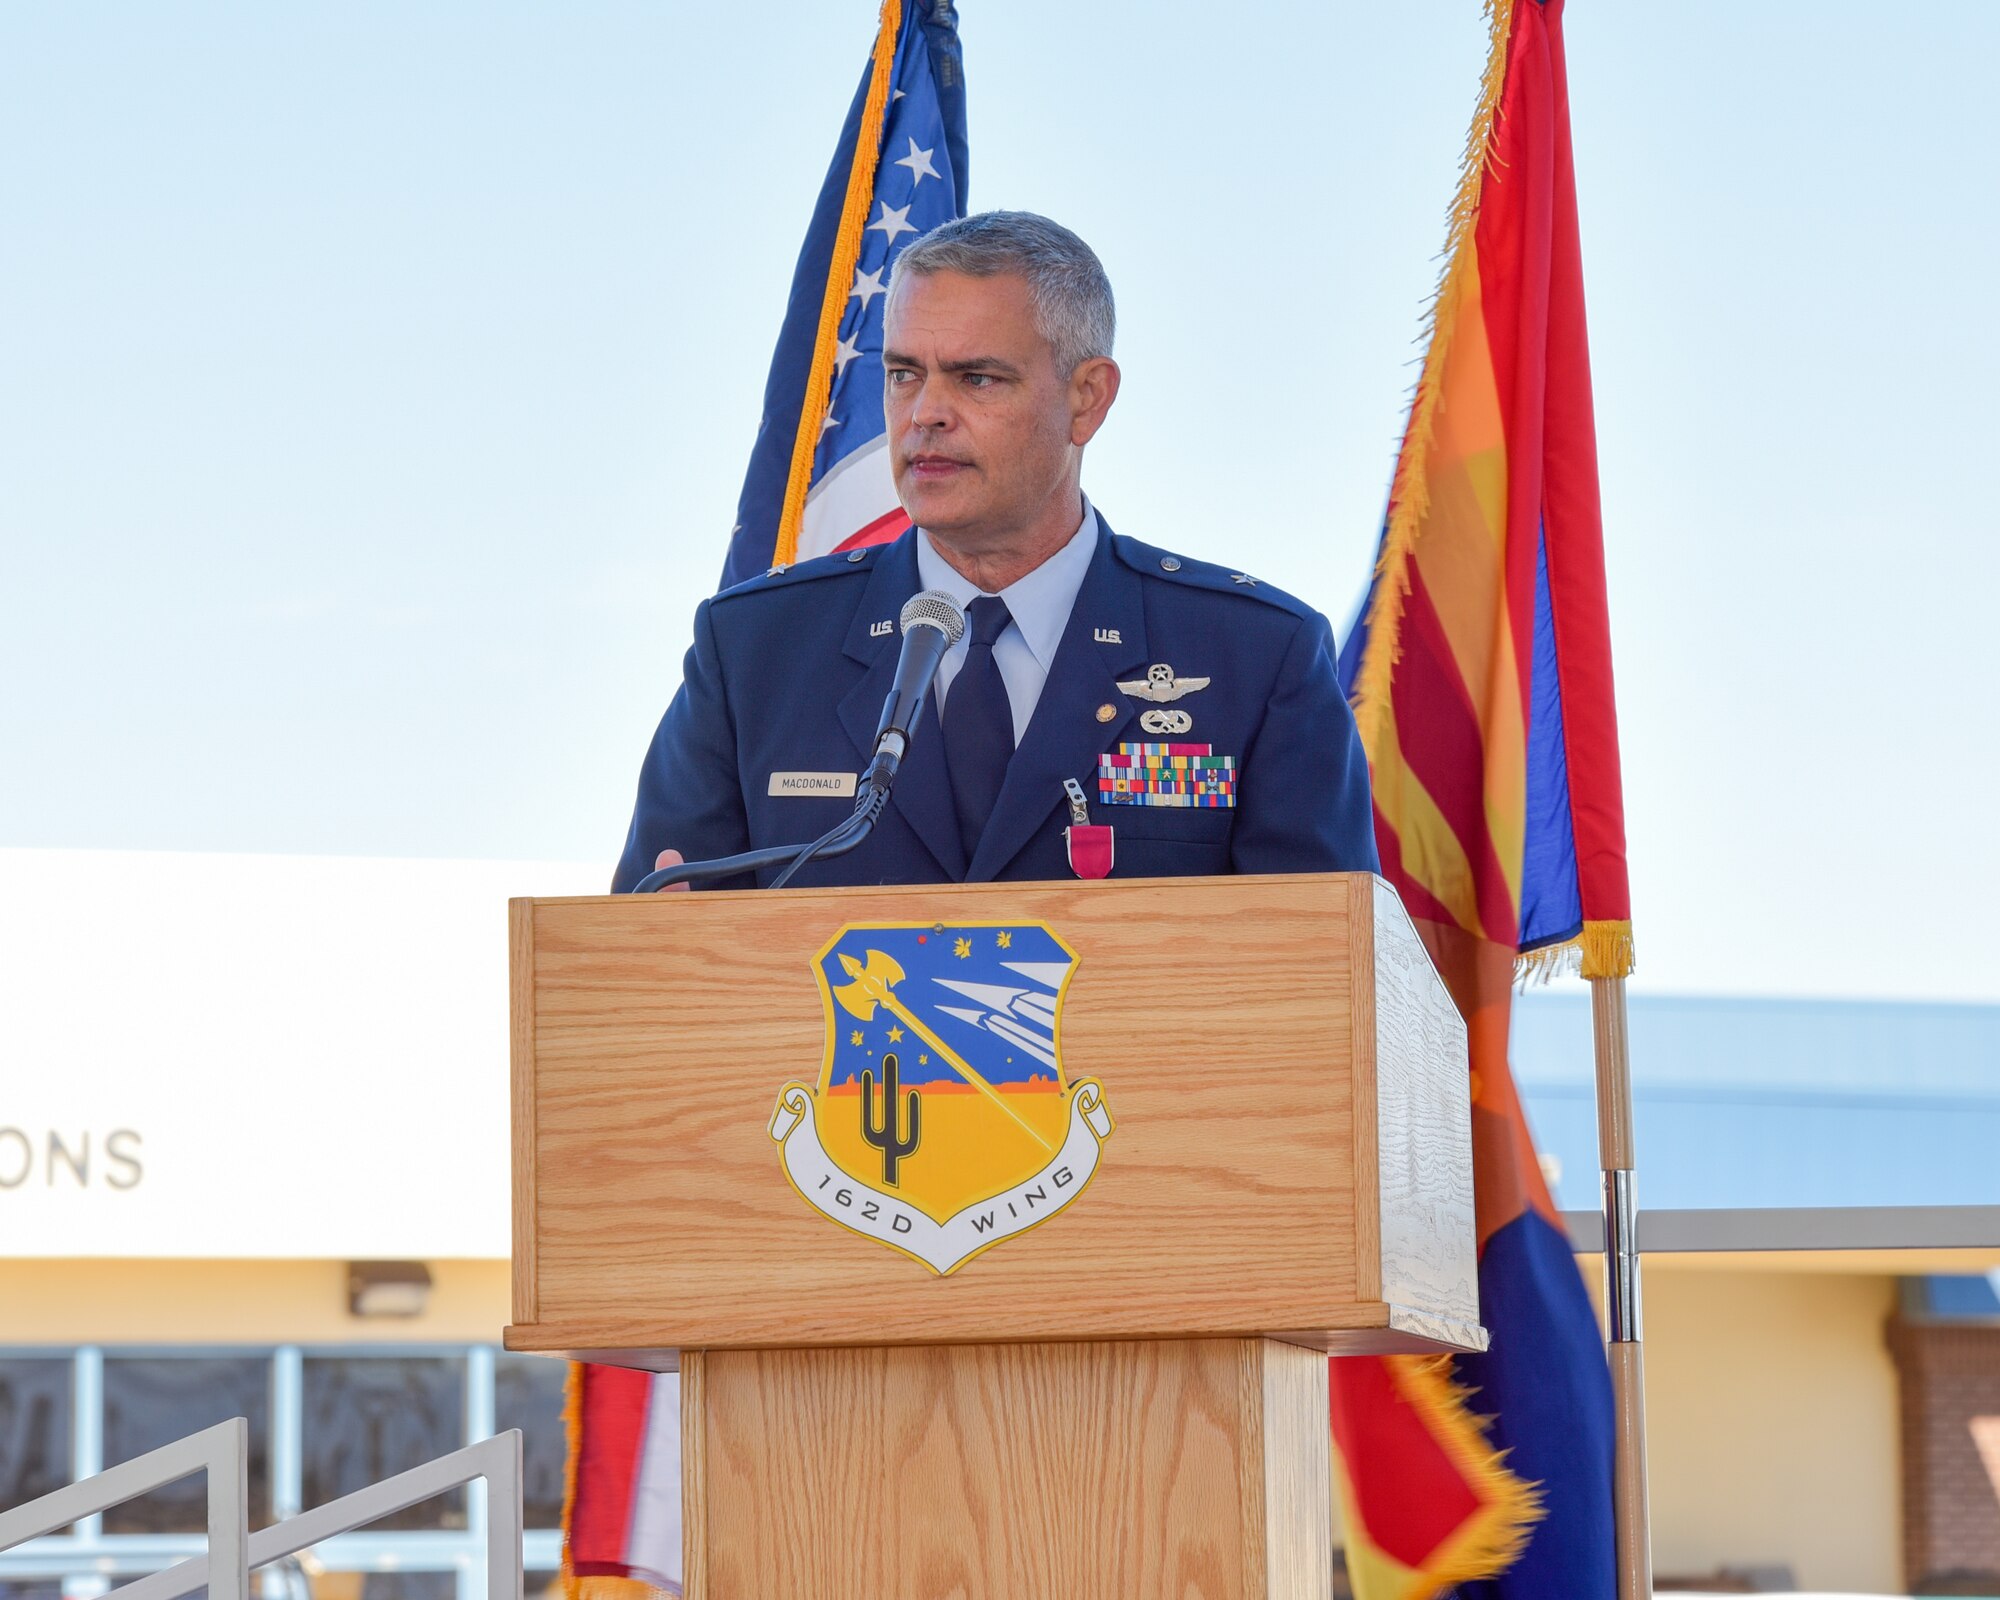 The 162nd Wing Arizona Air National Guard honored the retirement of its former wing commander Brig. Gen. Andrew MacDonald in a unique ceremony Jan. 10 at the Morris Air National Guard Base. Due to the COVID-19 pandemic, the wing held a ceremony for MacDonald’s retirement by limiting attendance to family and distinguished guests, in person, while live-streaming the event to members across base. (U.S. Air National Guard Photo by Staff Sgt. Aubrey Pomares/Released)